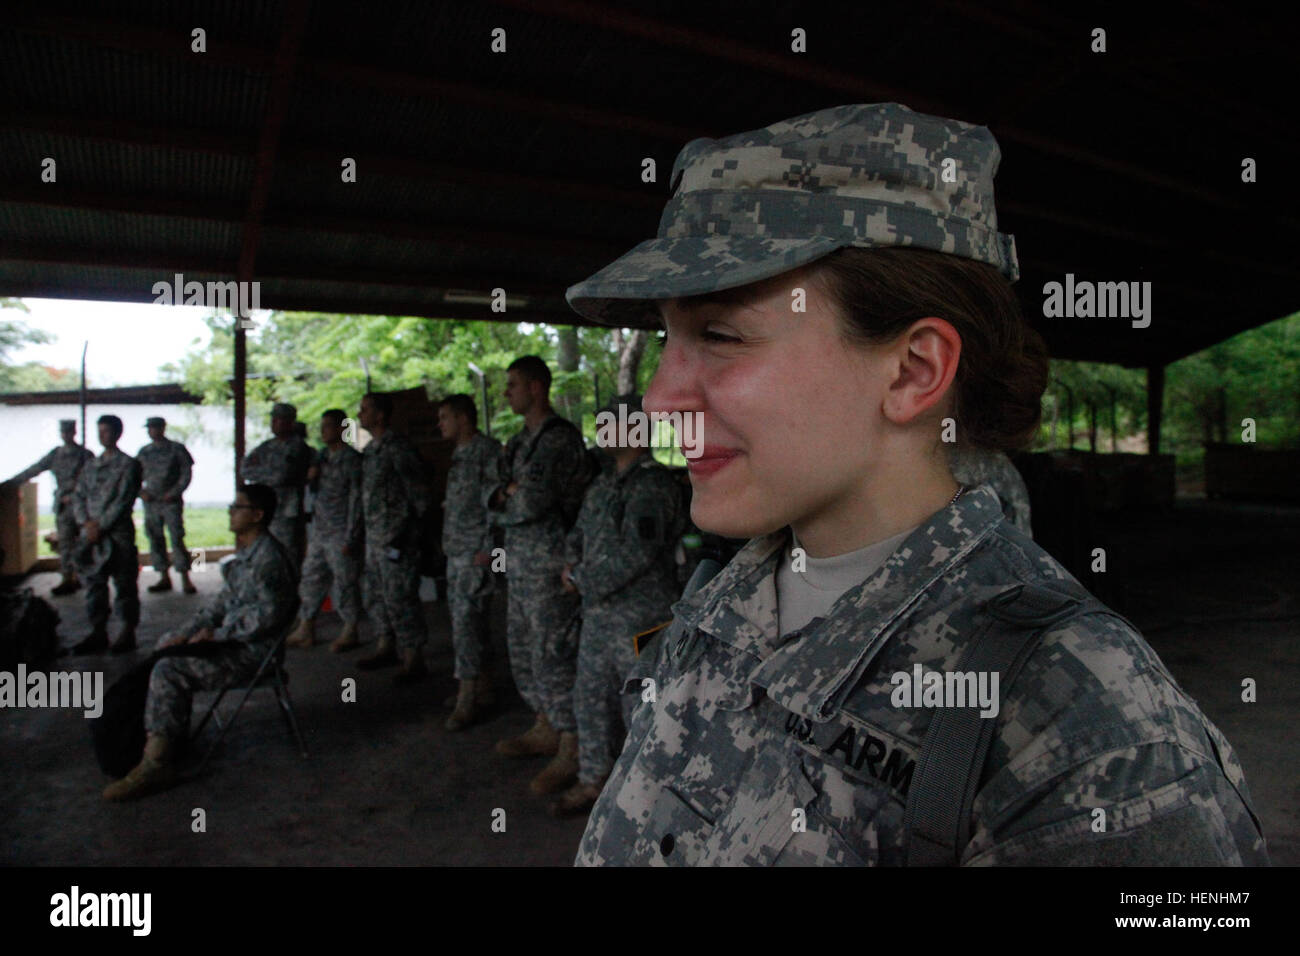 U.S. Army Cadet Maria Colompos from Northern Illinois University listens to a safety brief for a Medical Readiness Training Exercise during Beyond the Horizon, at Rio Grande, Guatemala, onJune 2, 2014. Beyond the Horizon is an annual exercise that embraces the partnership between the United States and Guatemala, to provide focused humanitarian assistance through various medical, dental, and civic action programs. (U.S. Army photo by Pfc. Josue Mayorga/Released) Beyond The Horizon 2014, Guatemala 140602-A-GK700-298 Stock Photo